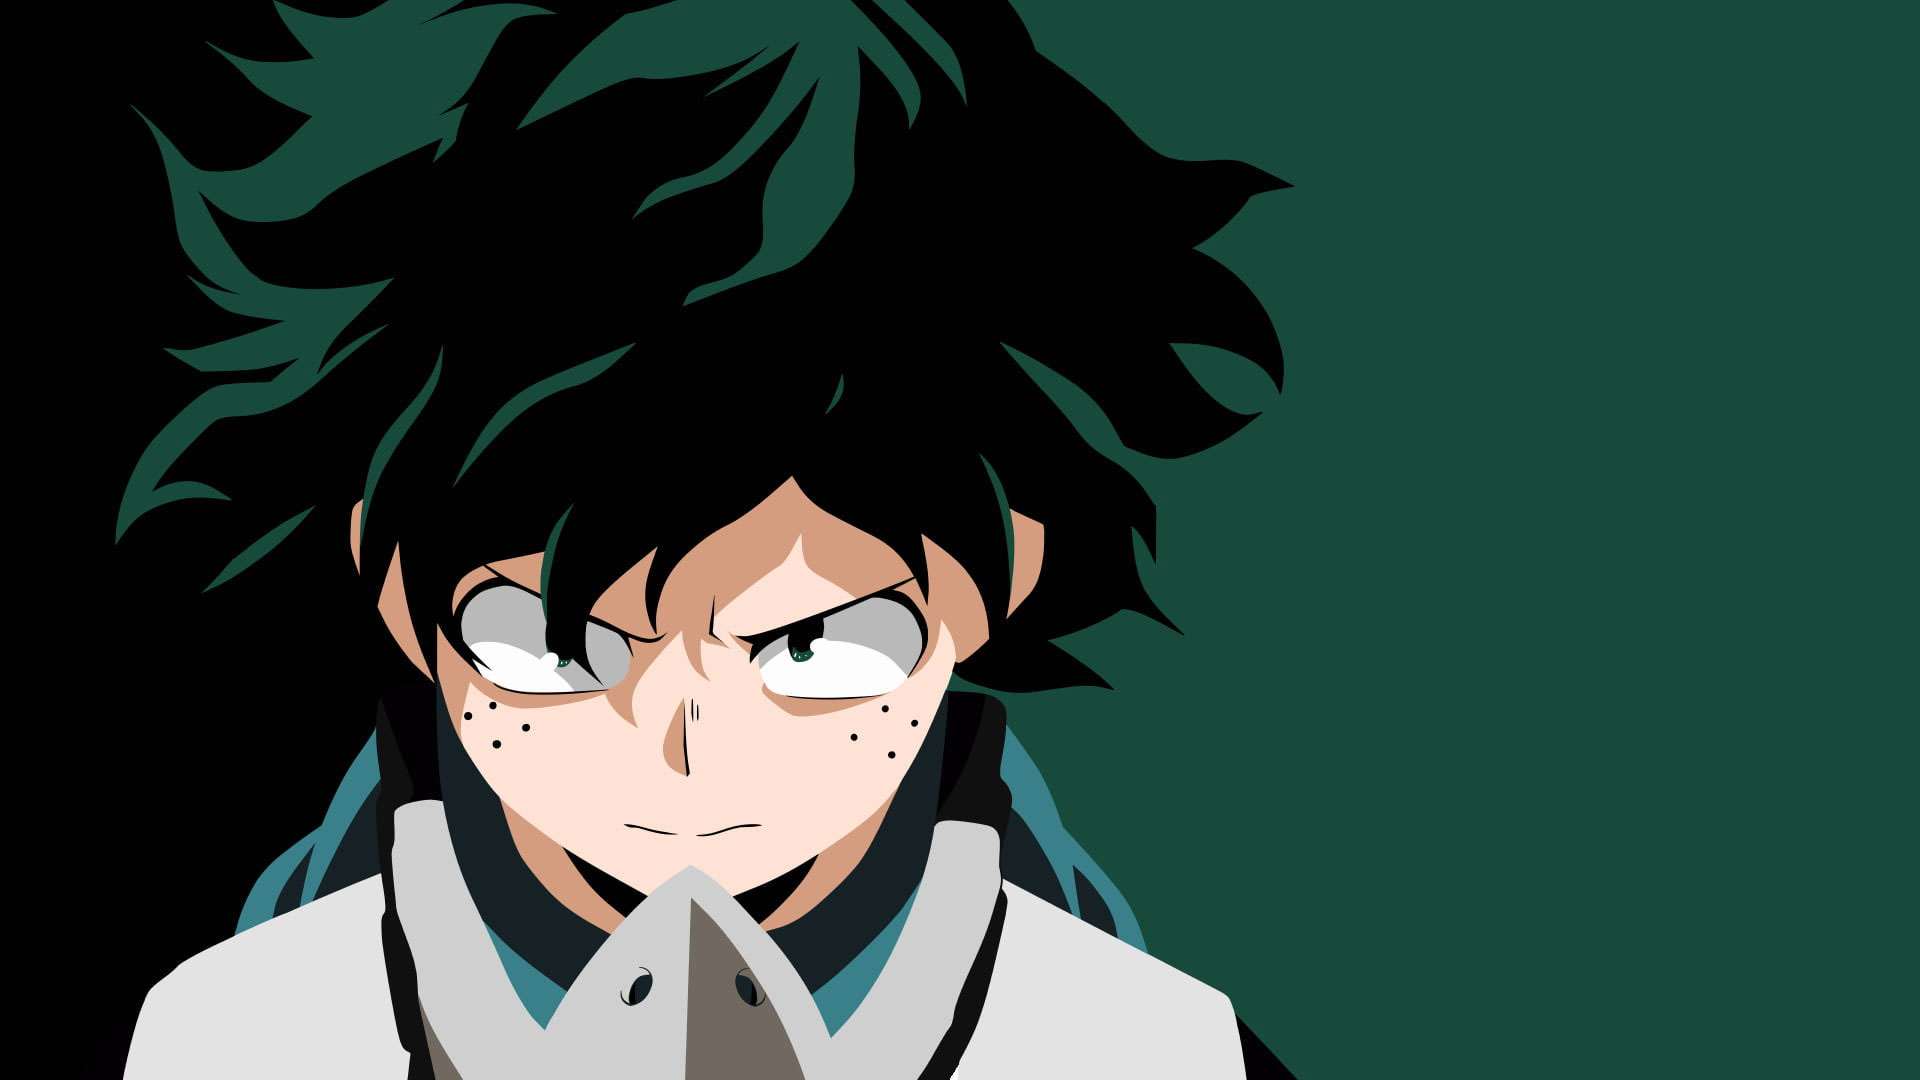 Male Anime Character Wallpaper, My Hero Academia • Wallpaper For You